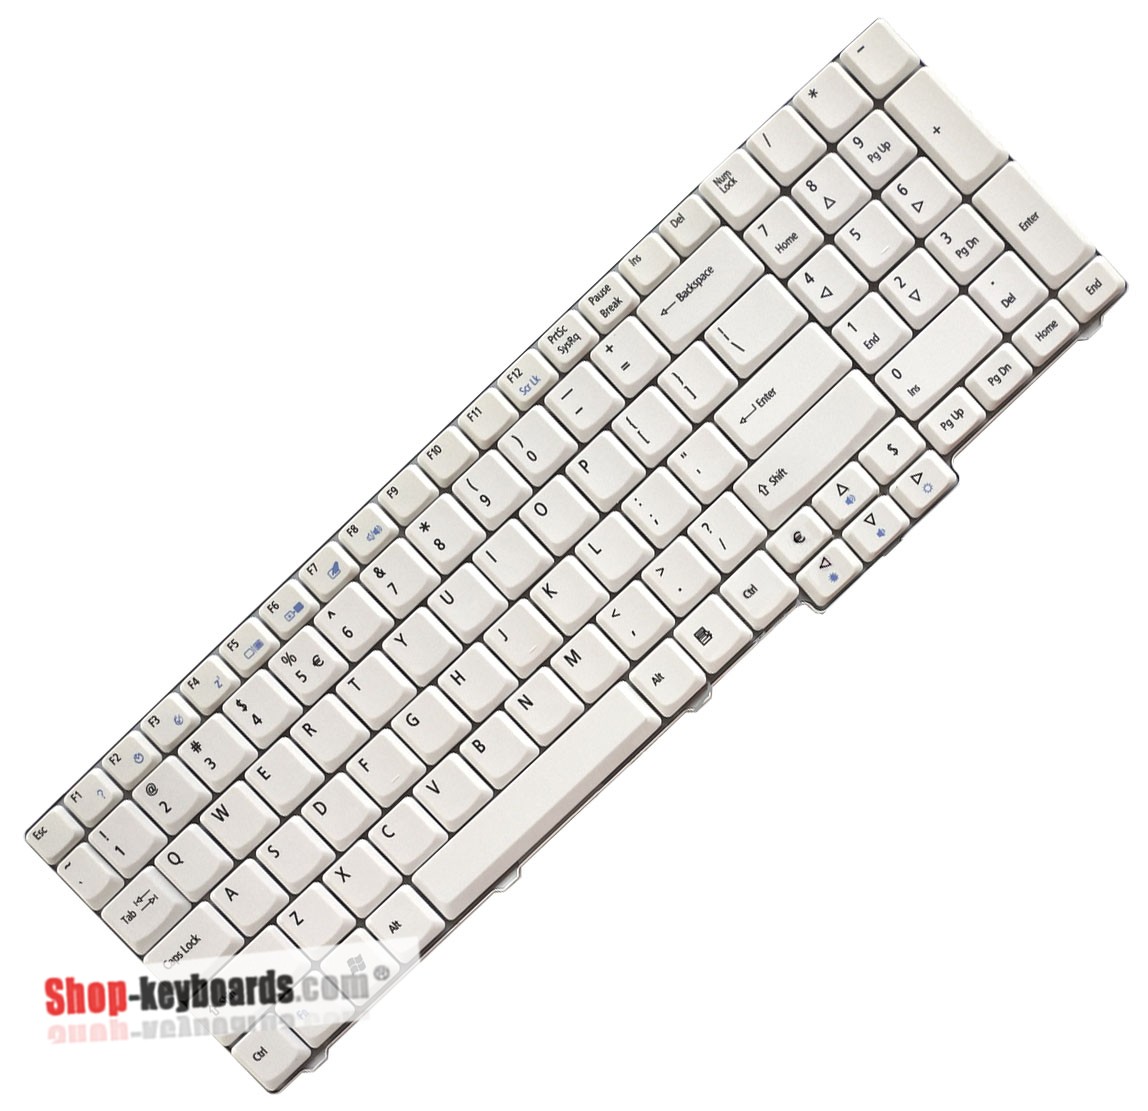 Acer Aspire 8530-5864  Keyboard replacement